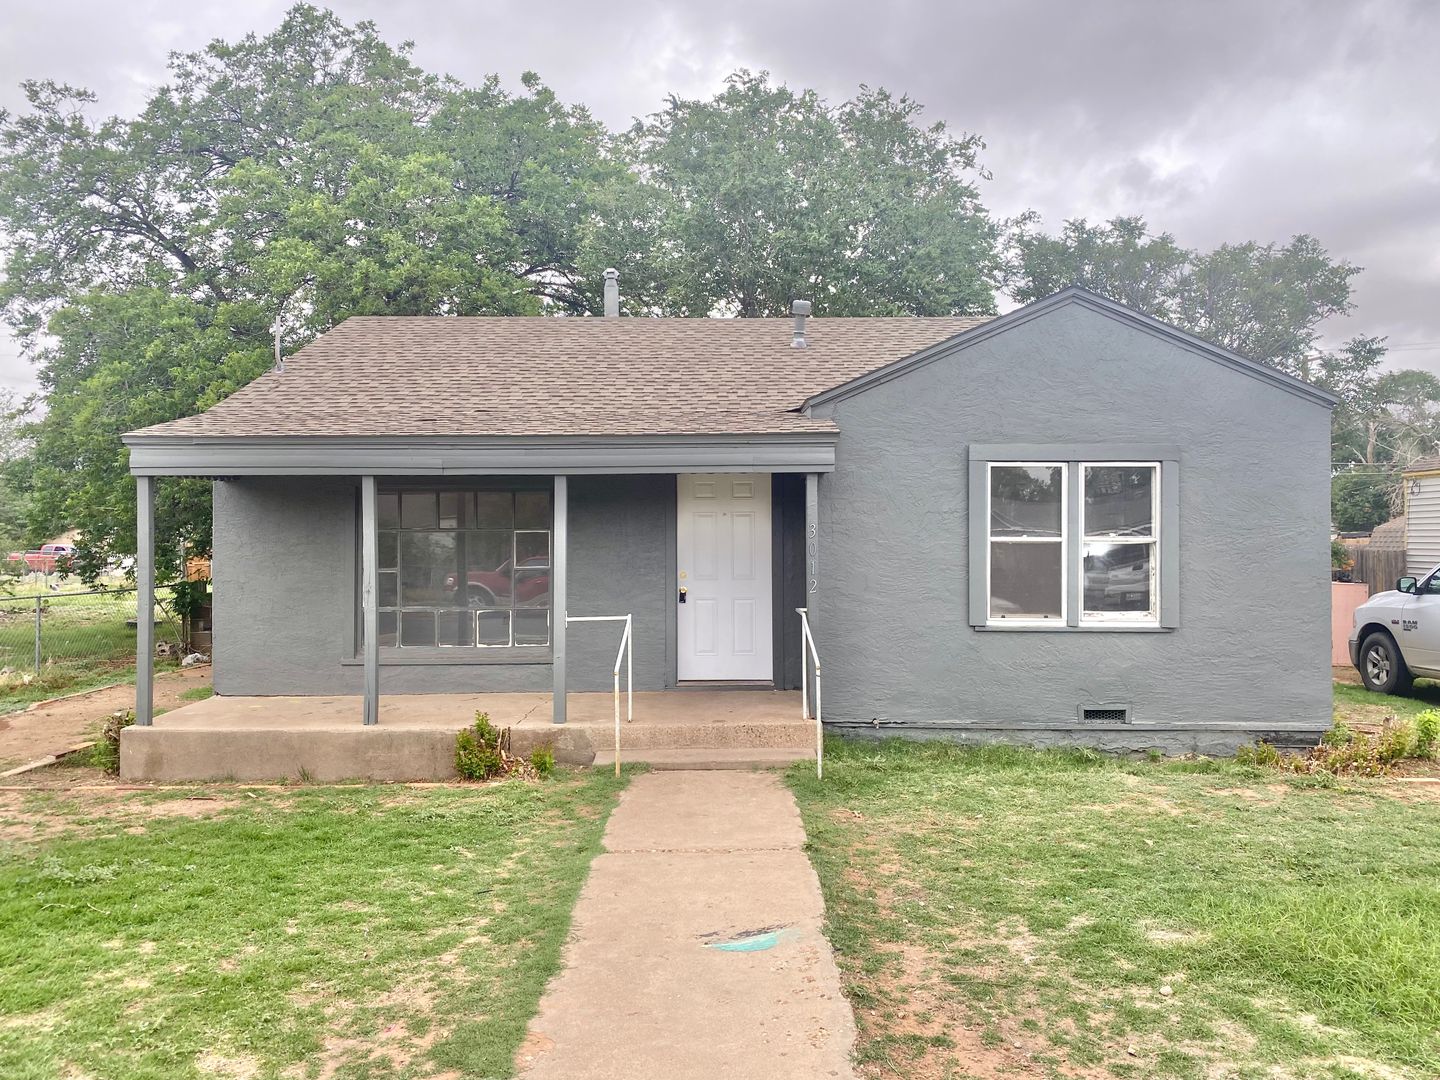 2 Bed 1 Bath Home Now Available!